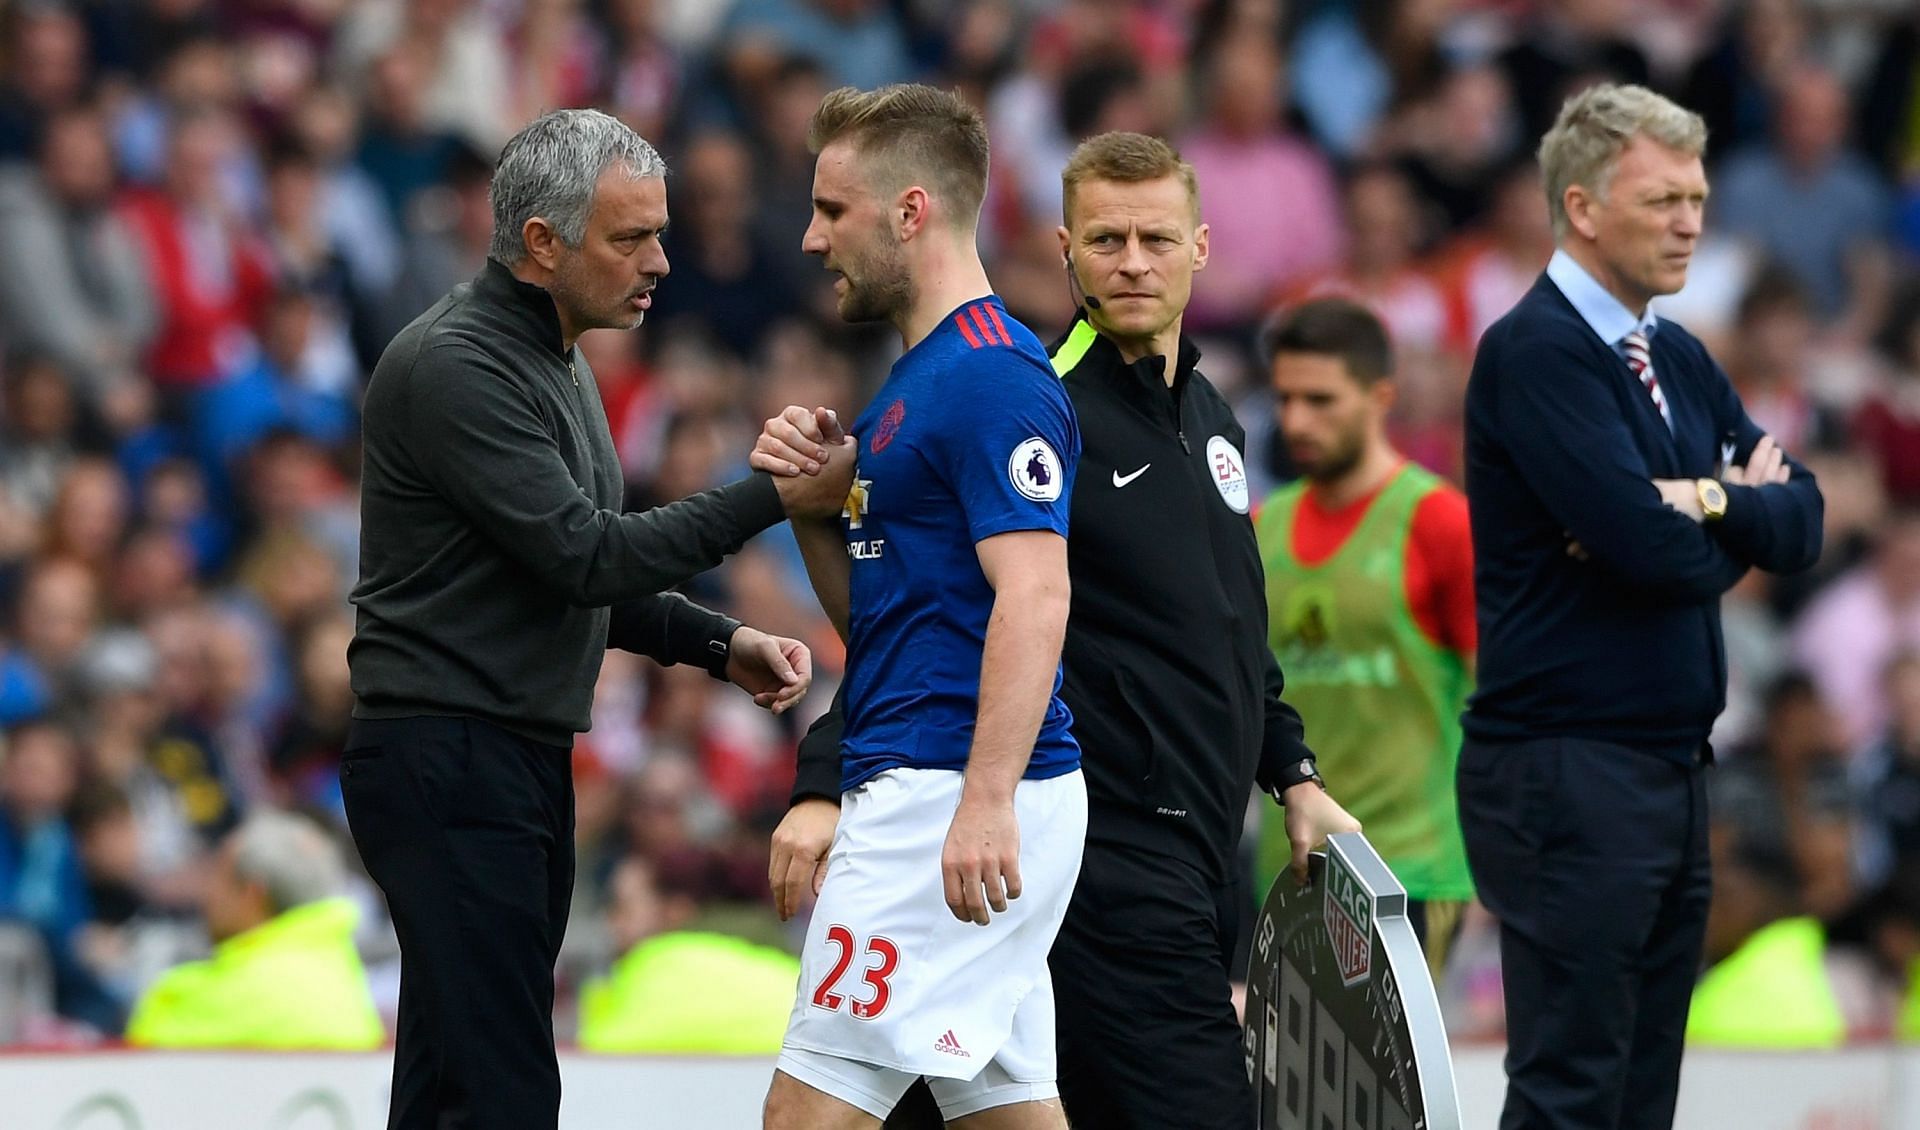 Luke Shaw had a difficult time playing under Jose Mourinho.